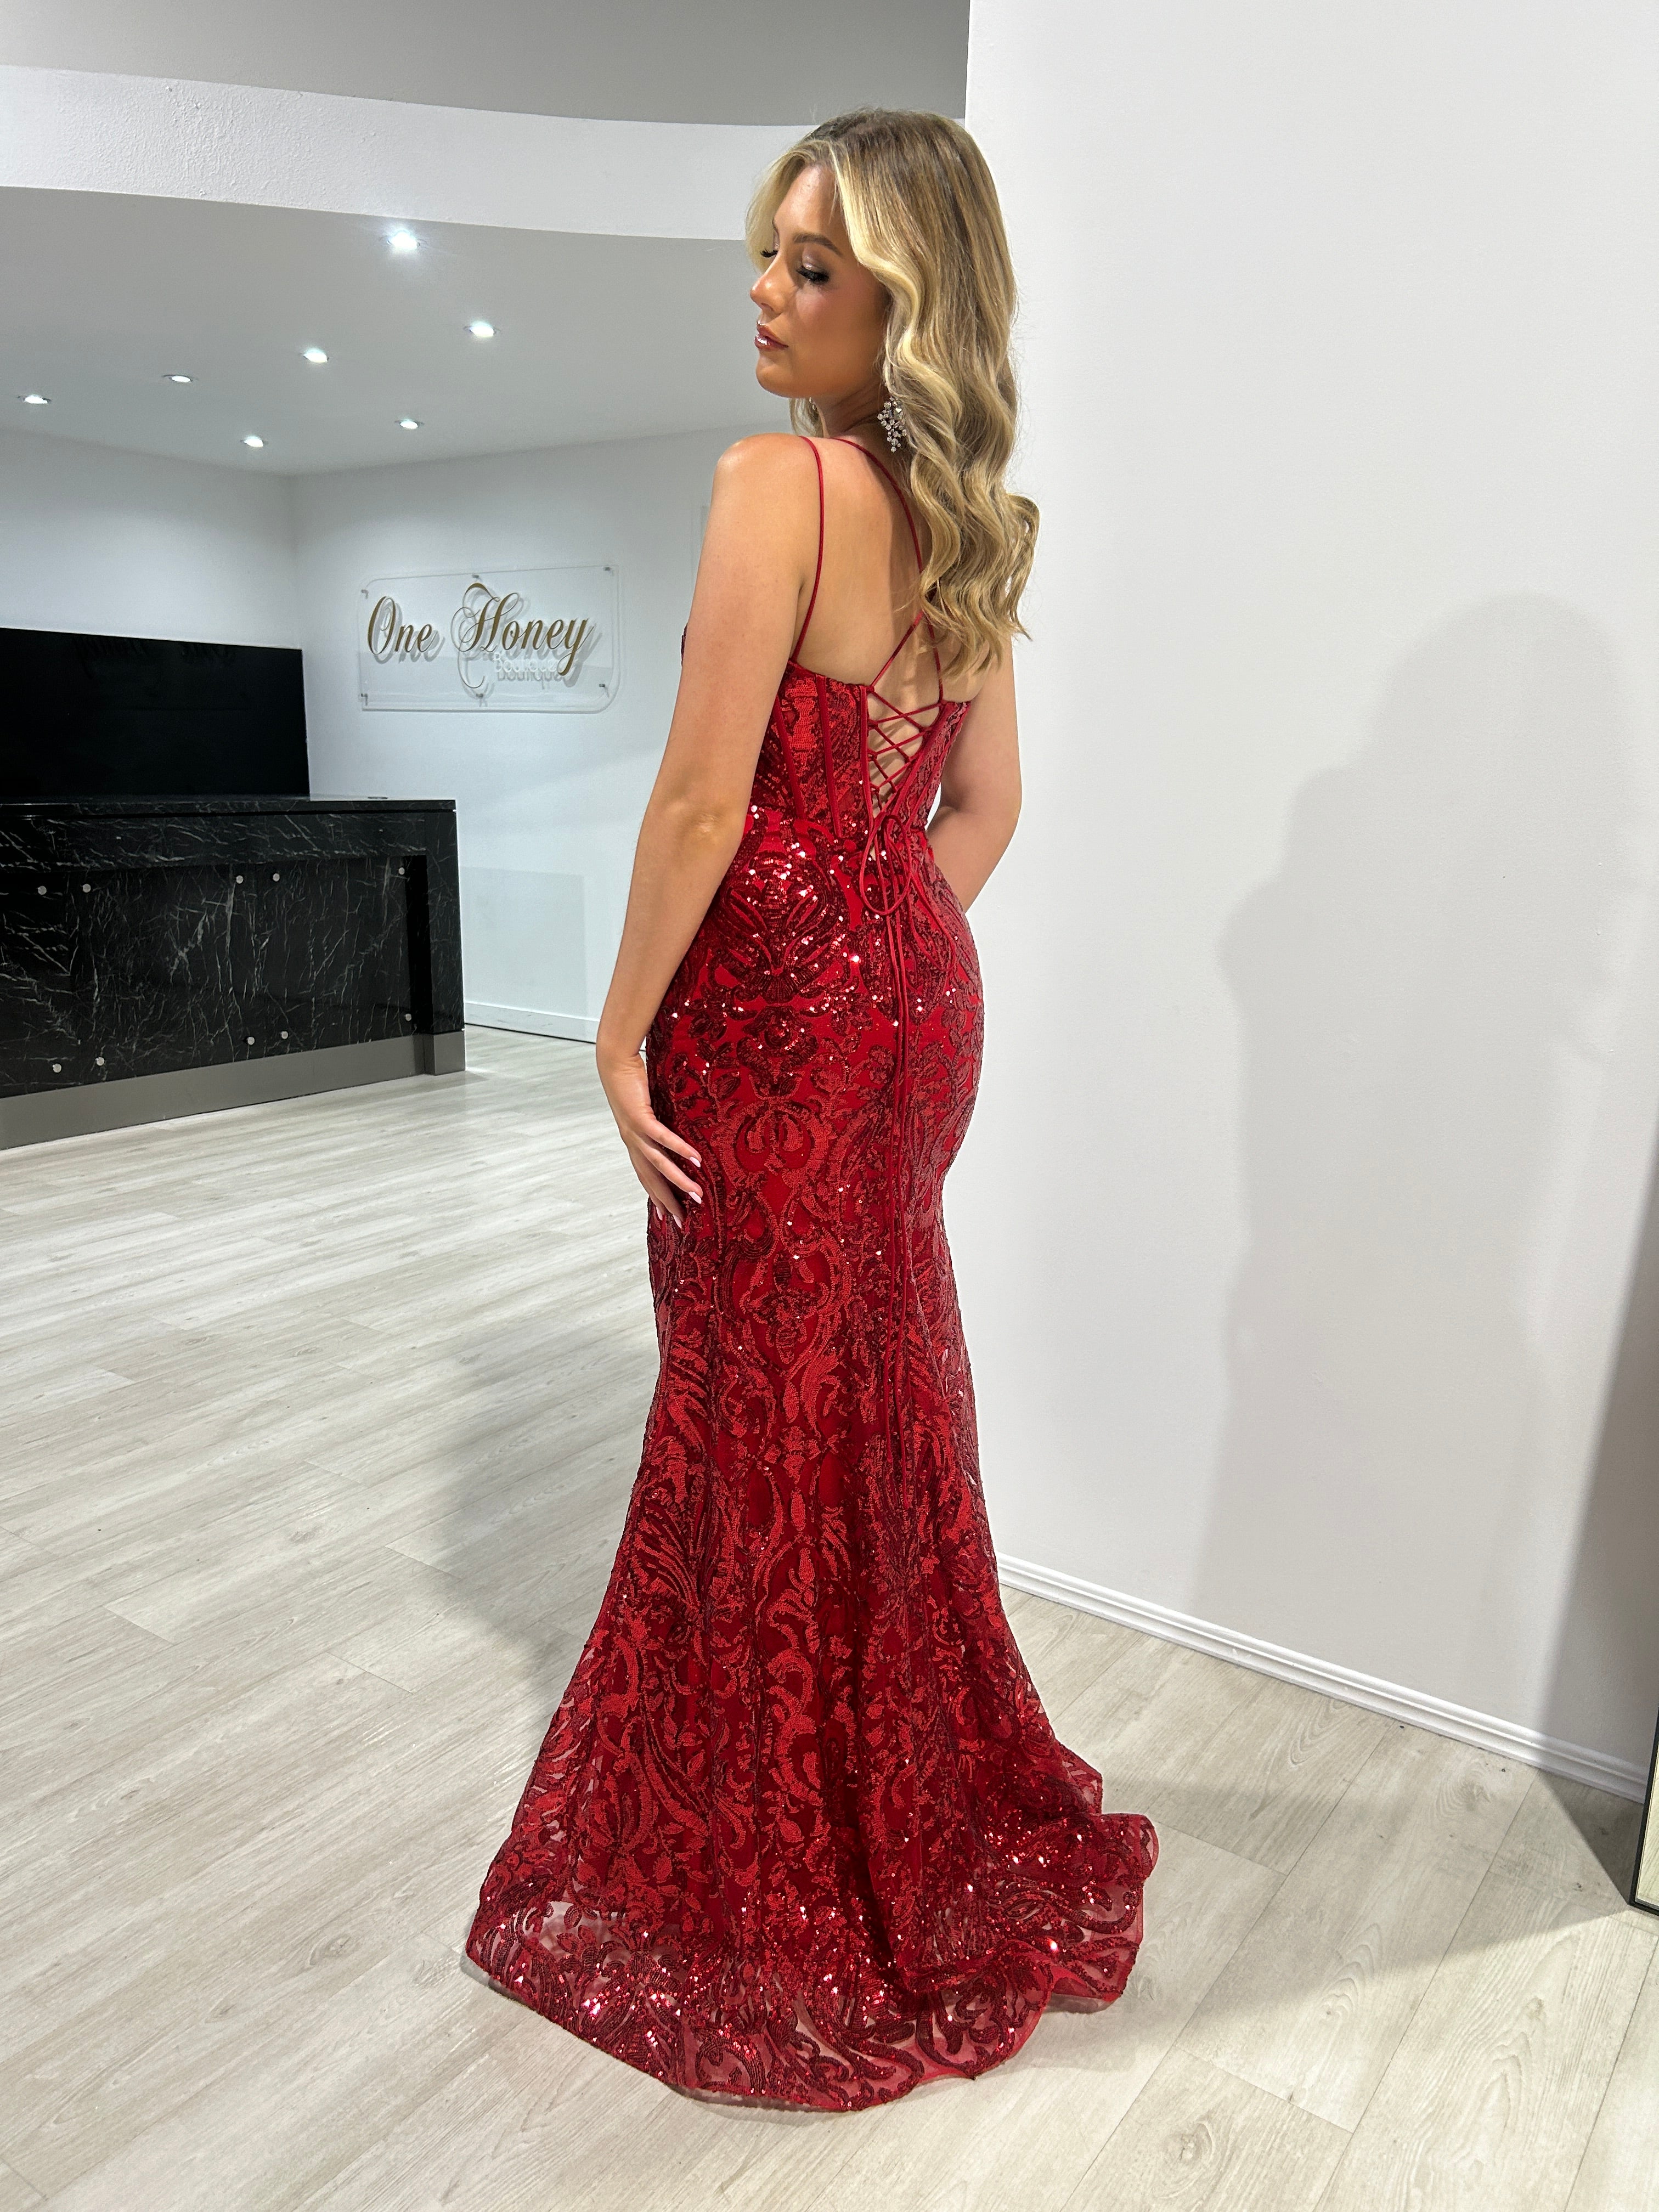 Honey Couture MILLIE Red Sequin Corset Mermaid Formal Gown Dress